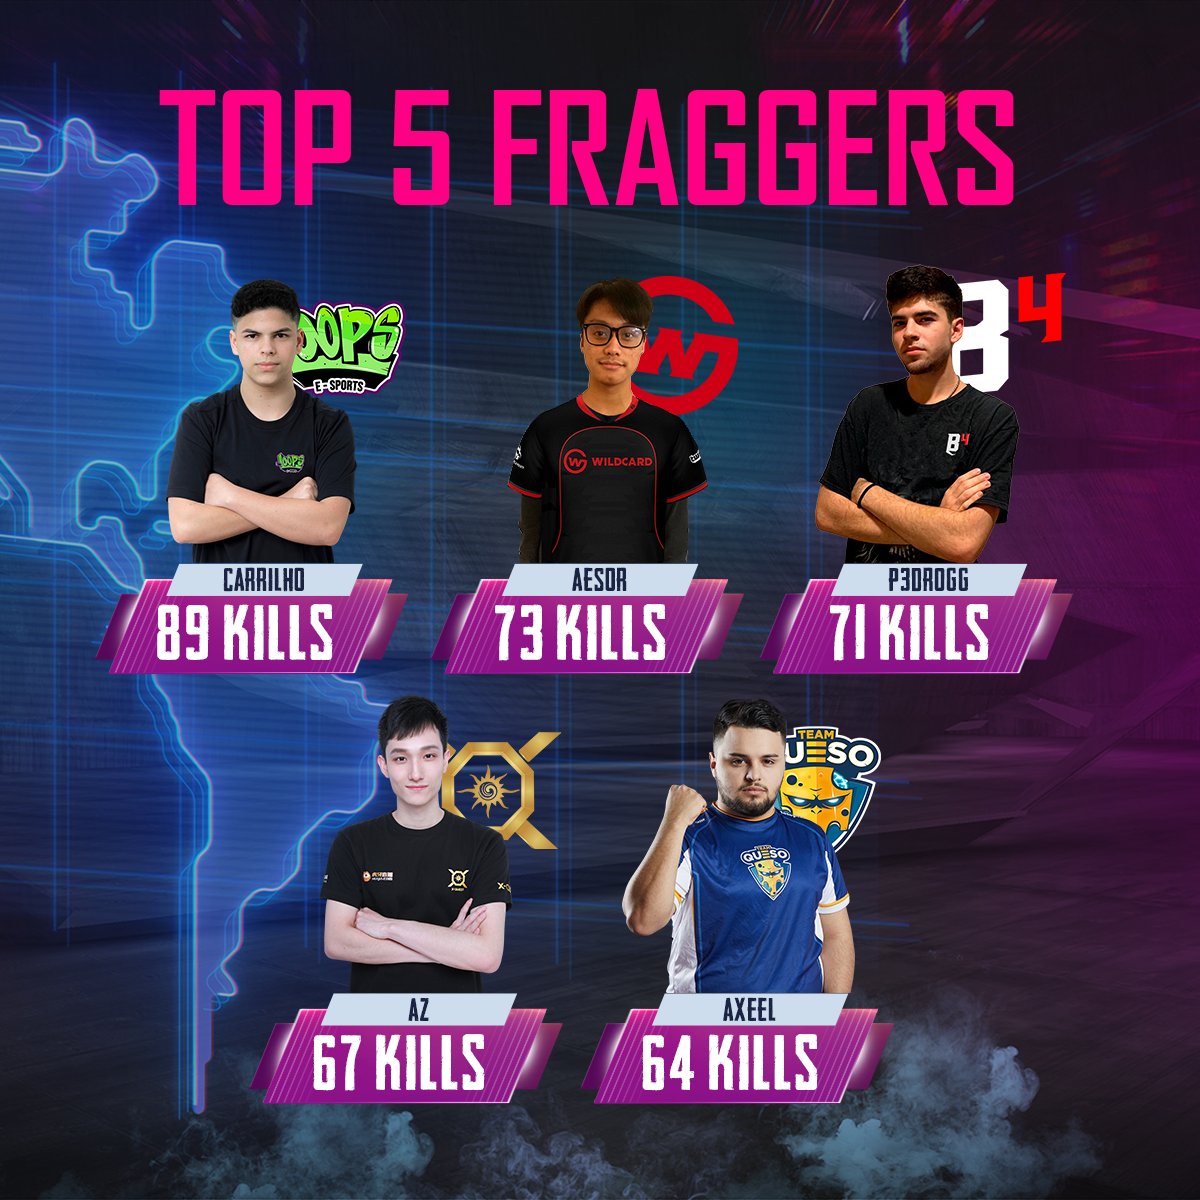 Reproducere usikre Metal linje PUBG MOBILE Esports on Twitter: "The overall Top 5 Fraggers of the #PMPL  Americas! We have team players from both North America and South America in  the Top 5, with @loopsesports's Carrilho